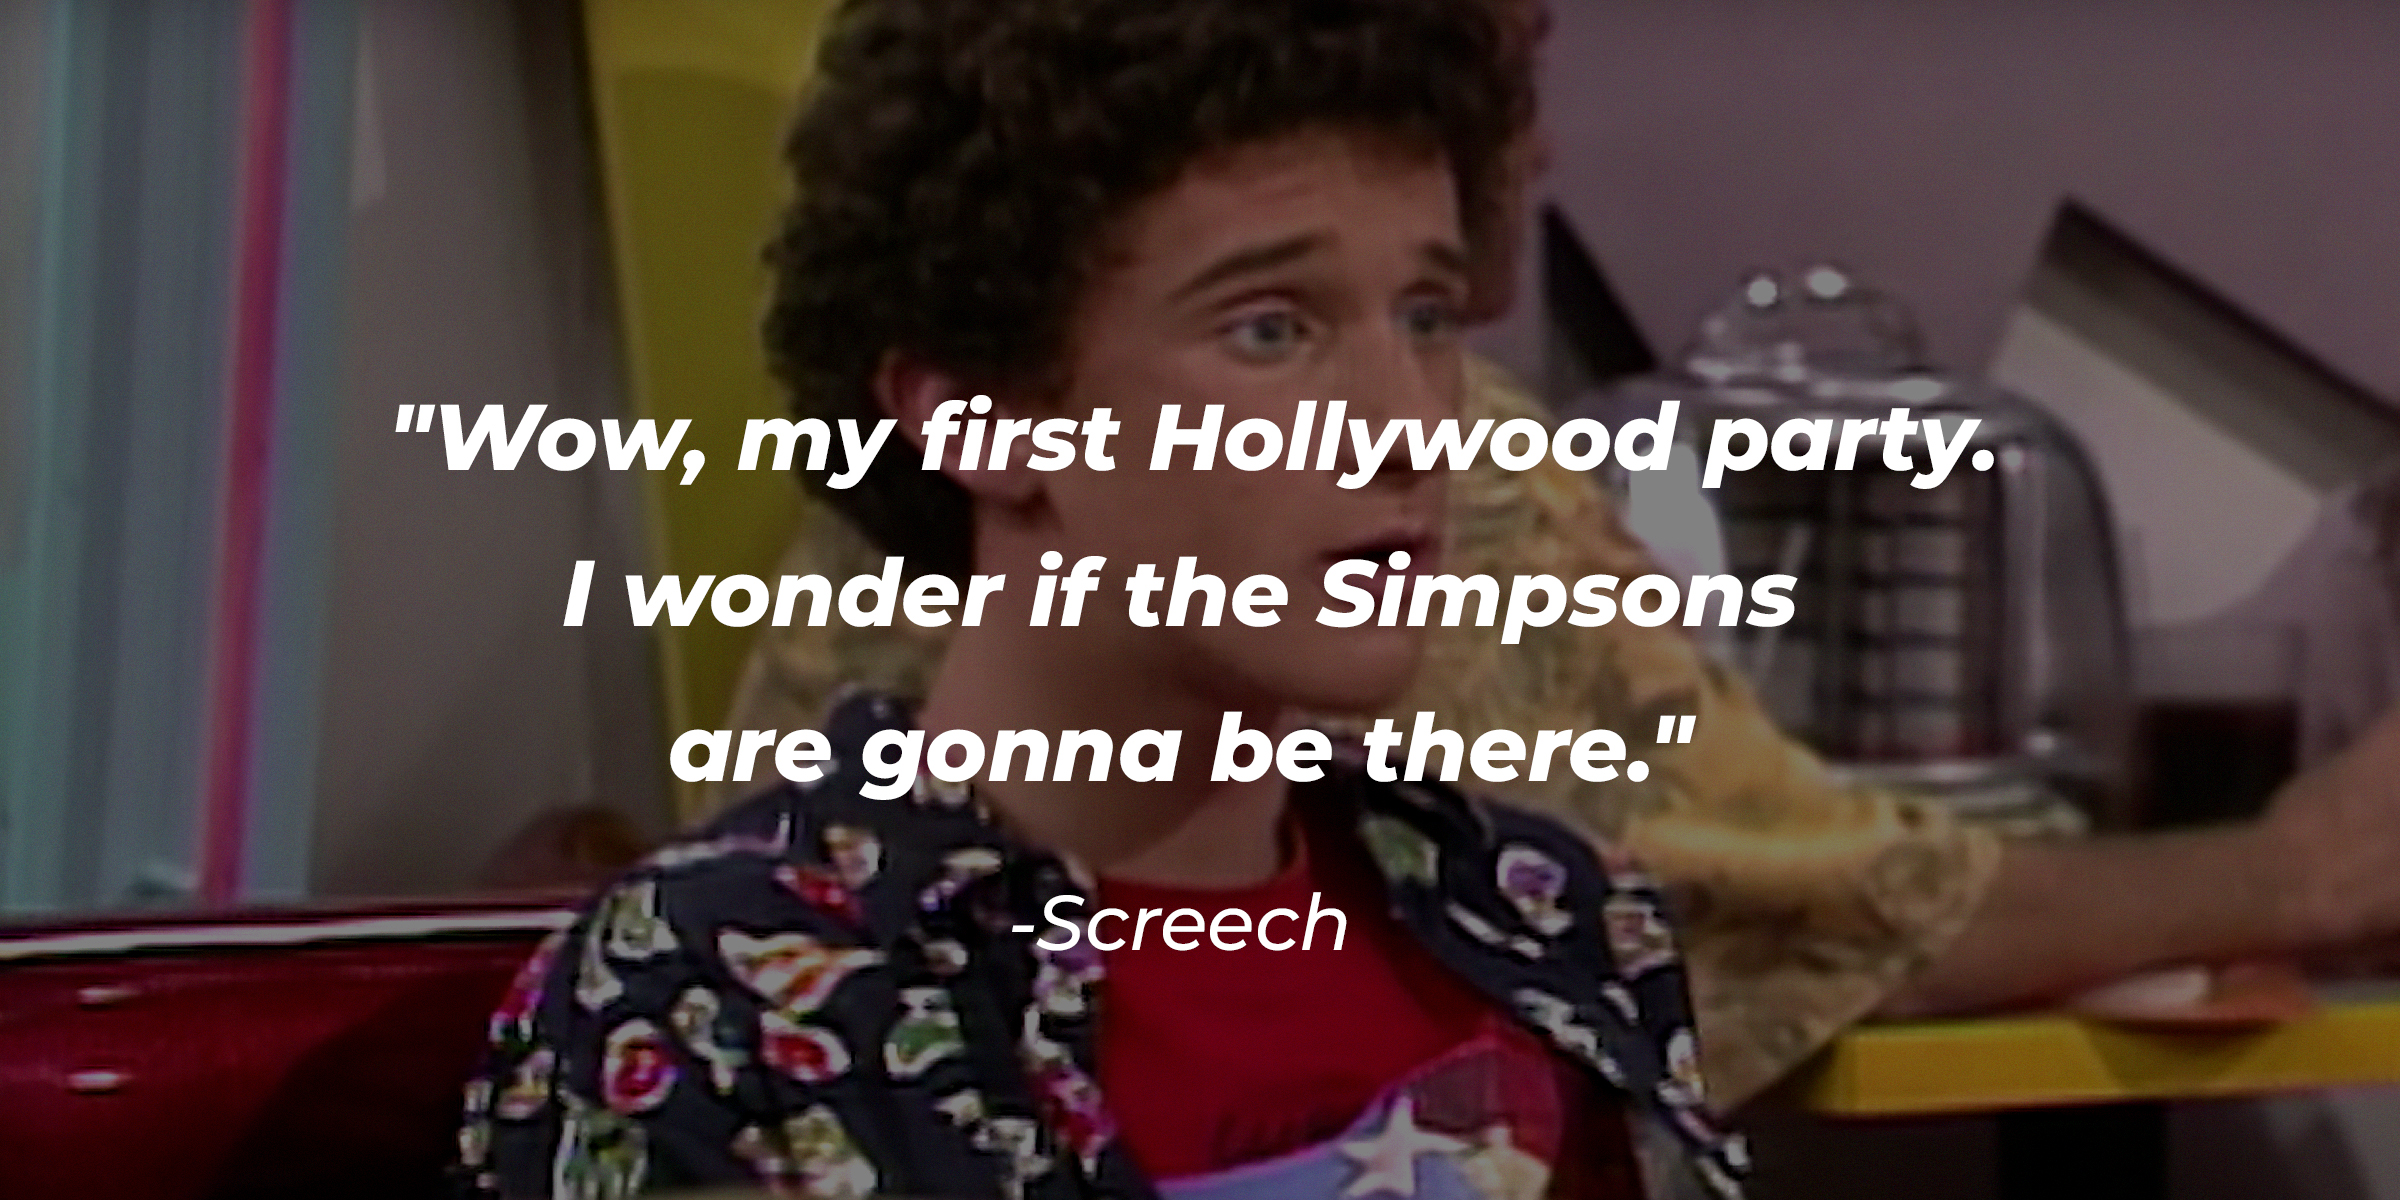 Screech with his quote, "Wow, my first Hollywood party. I wonder if the Simpsons are gonna be there." | Source: youtube.com/SavedbytheBell